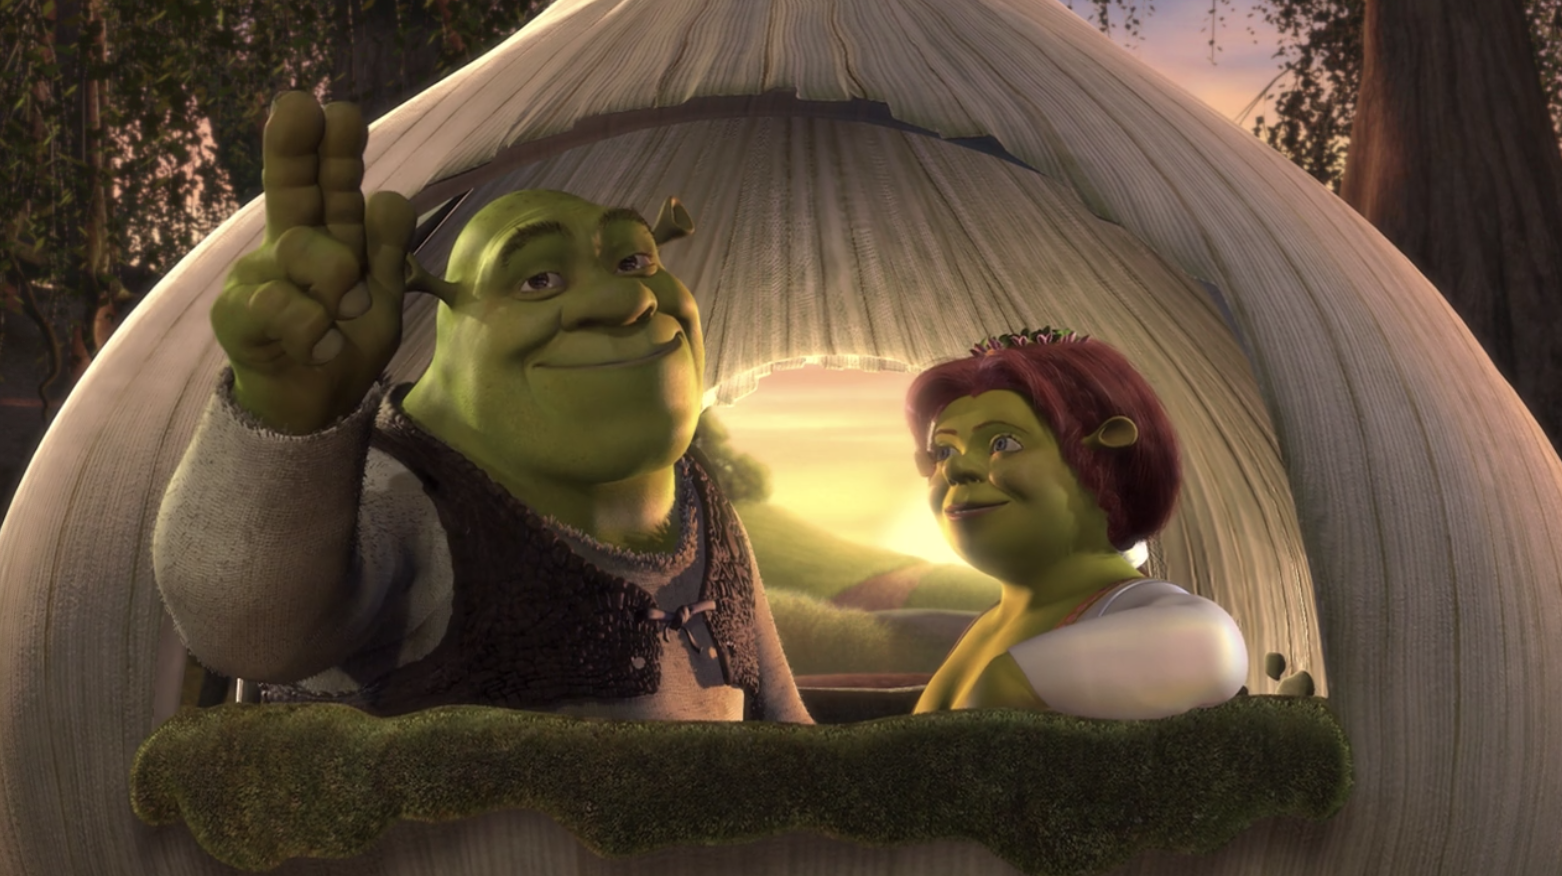 Shrek and Fiona riding off into the sunset 